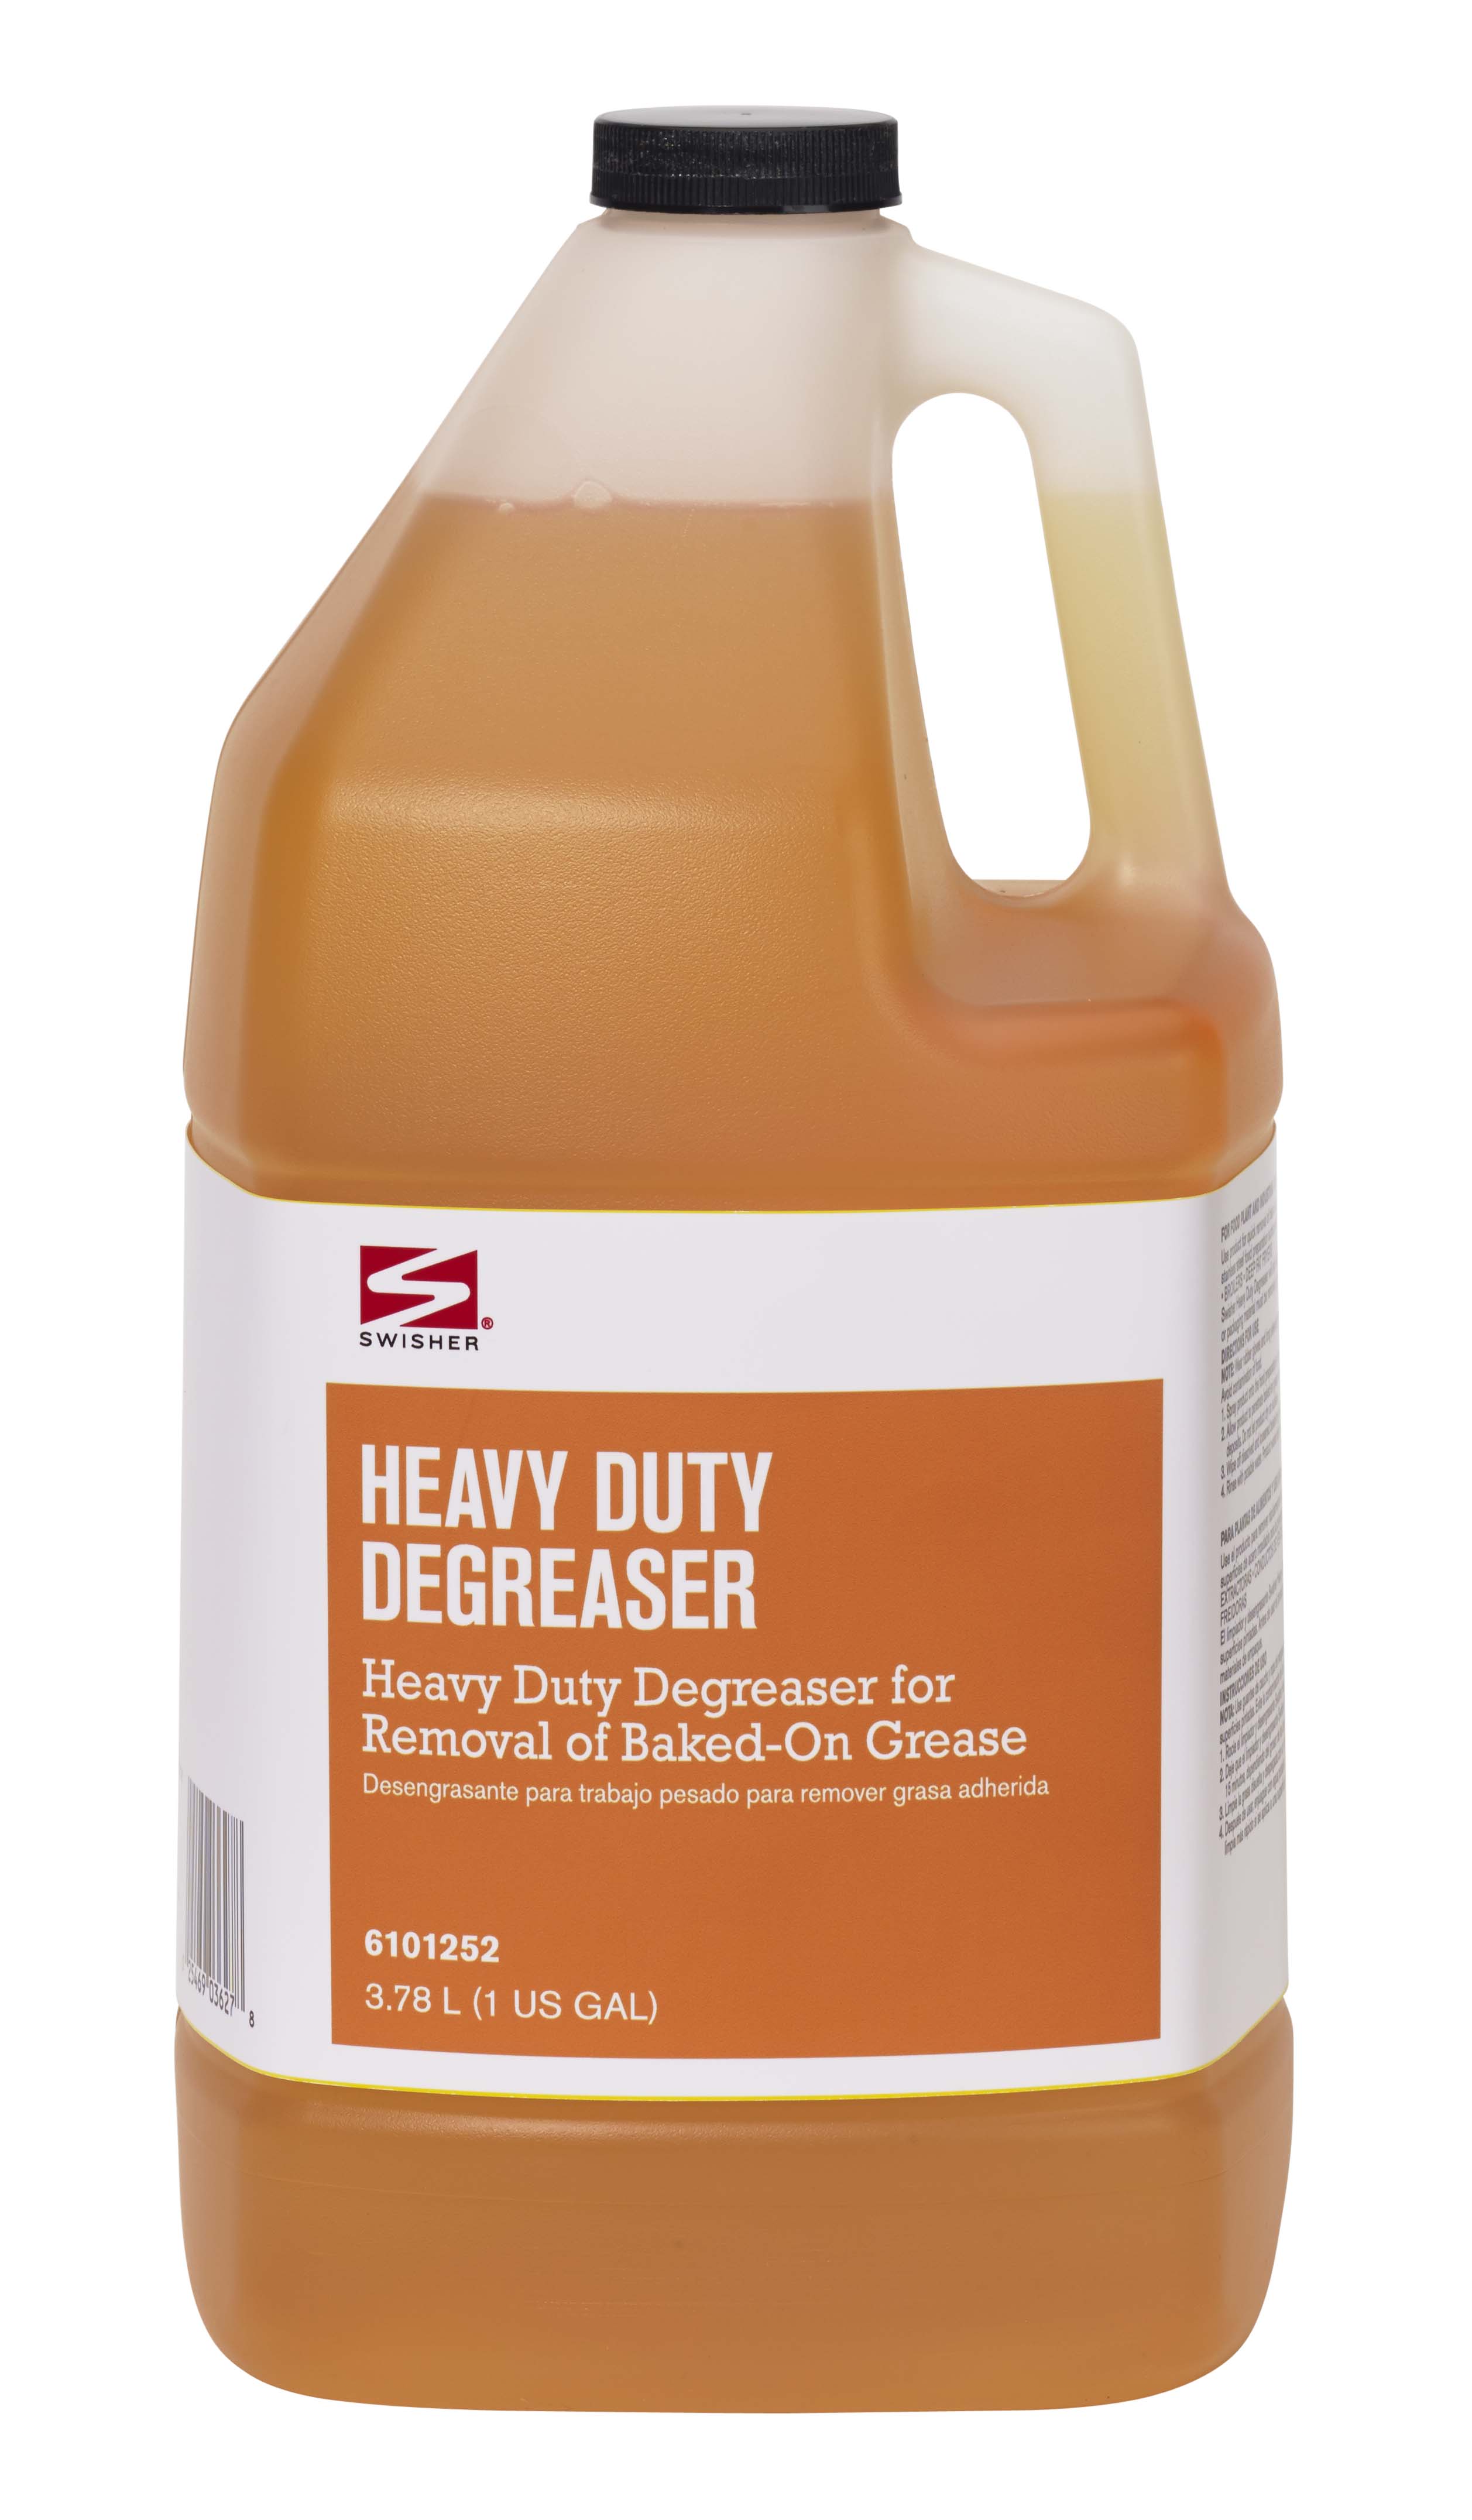 15 oz. Heavy-Duty Engine Degreaser Cleaner Spray (Pack of 2